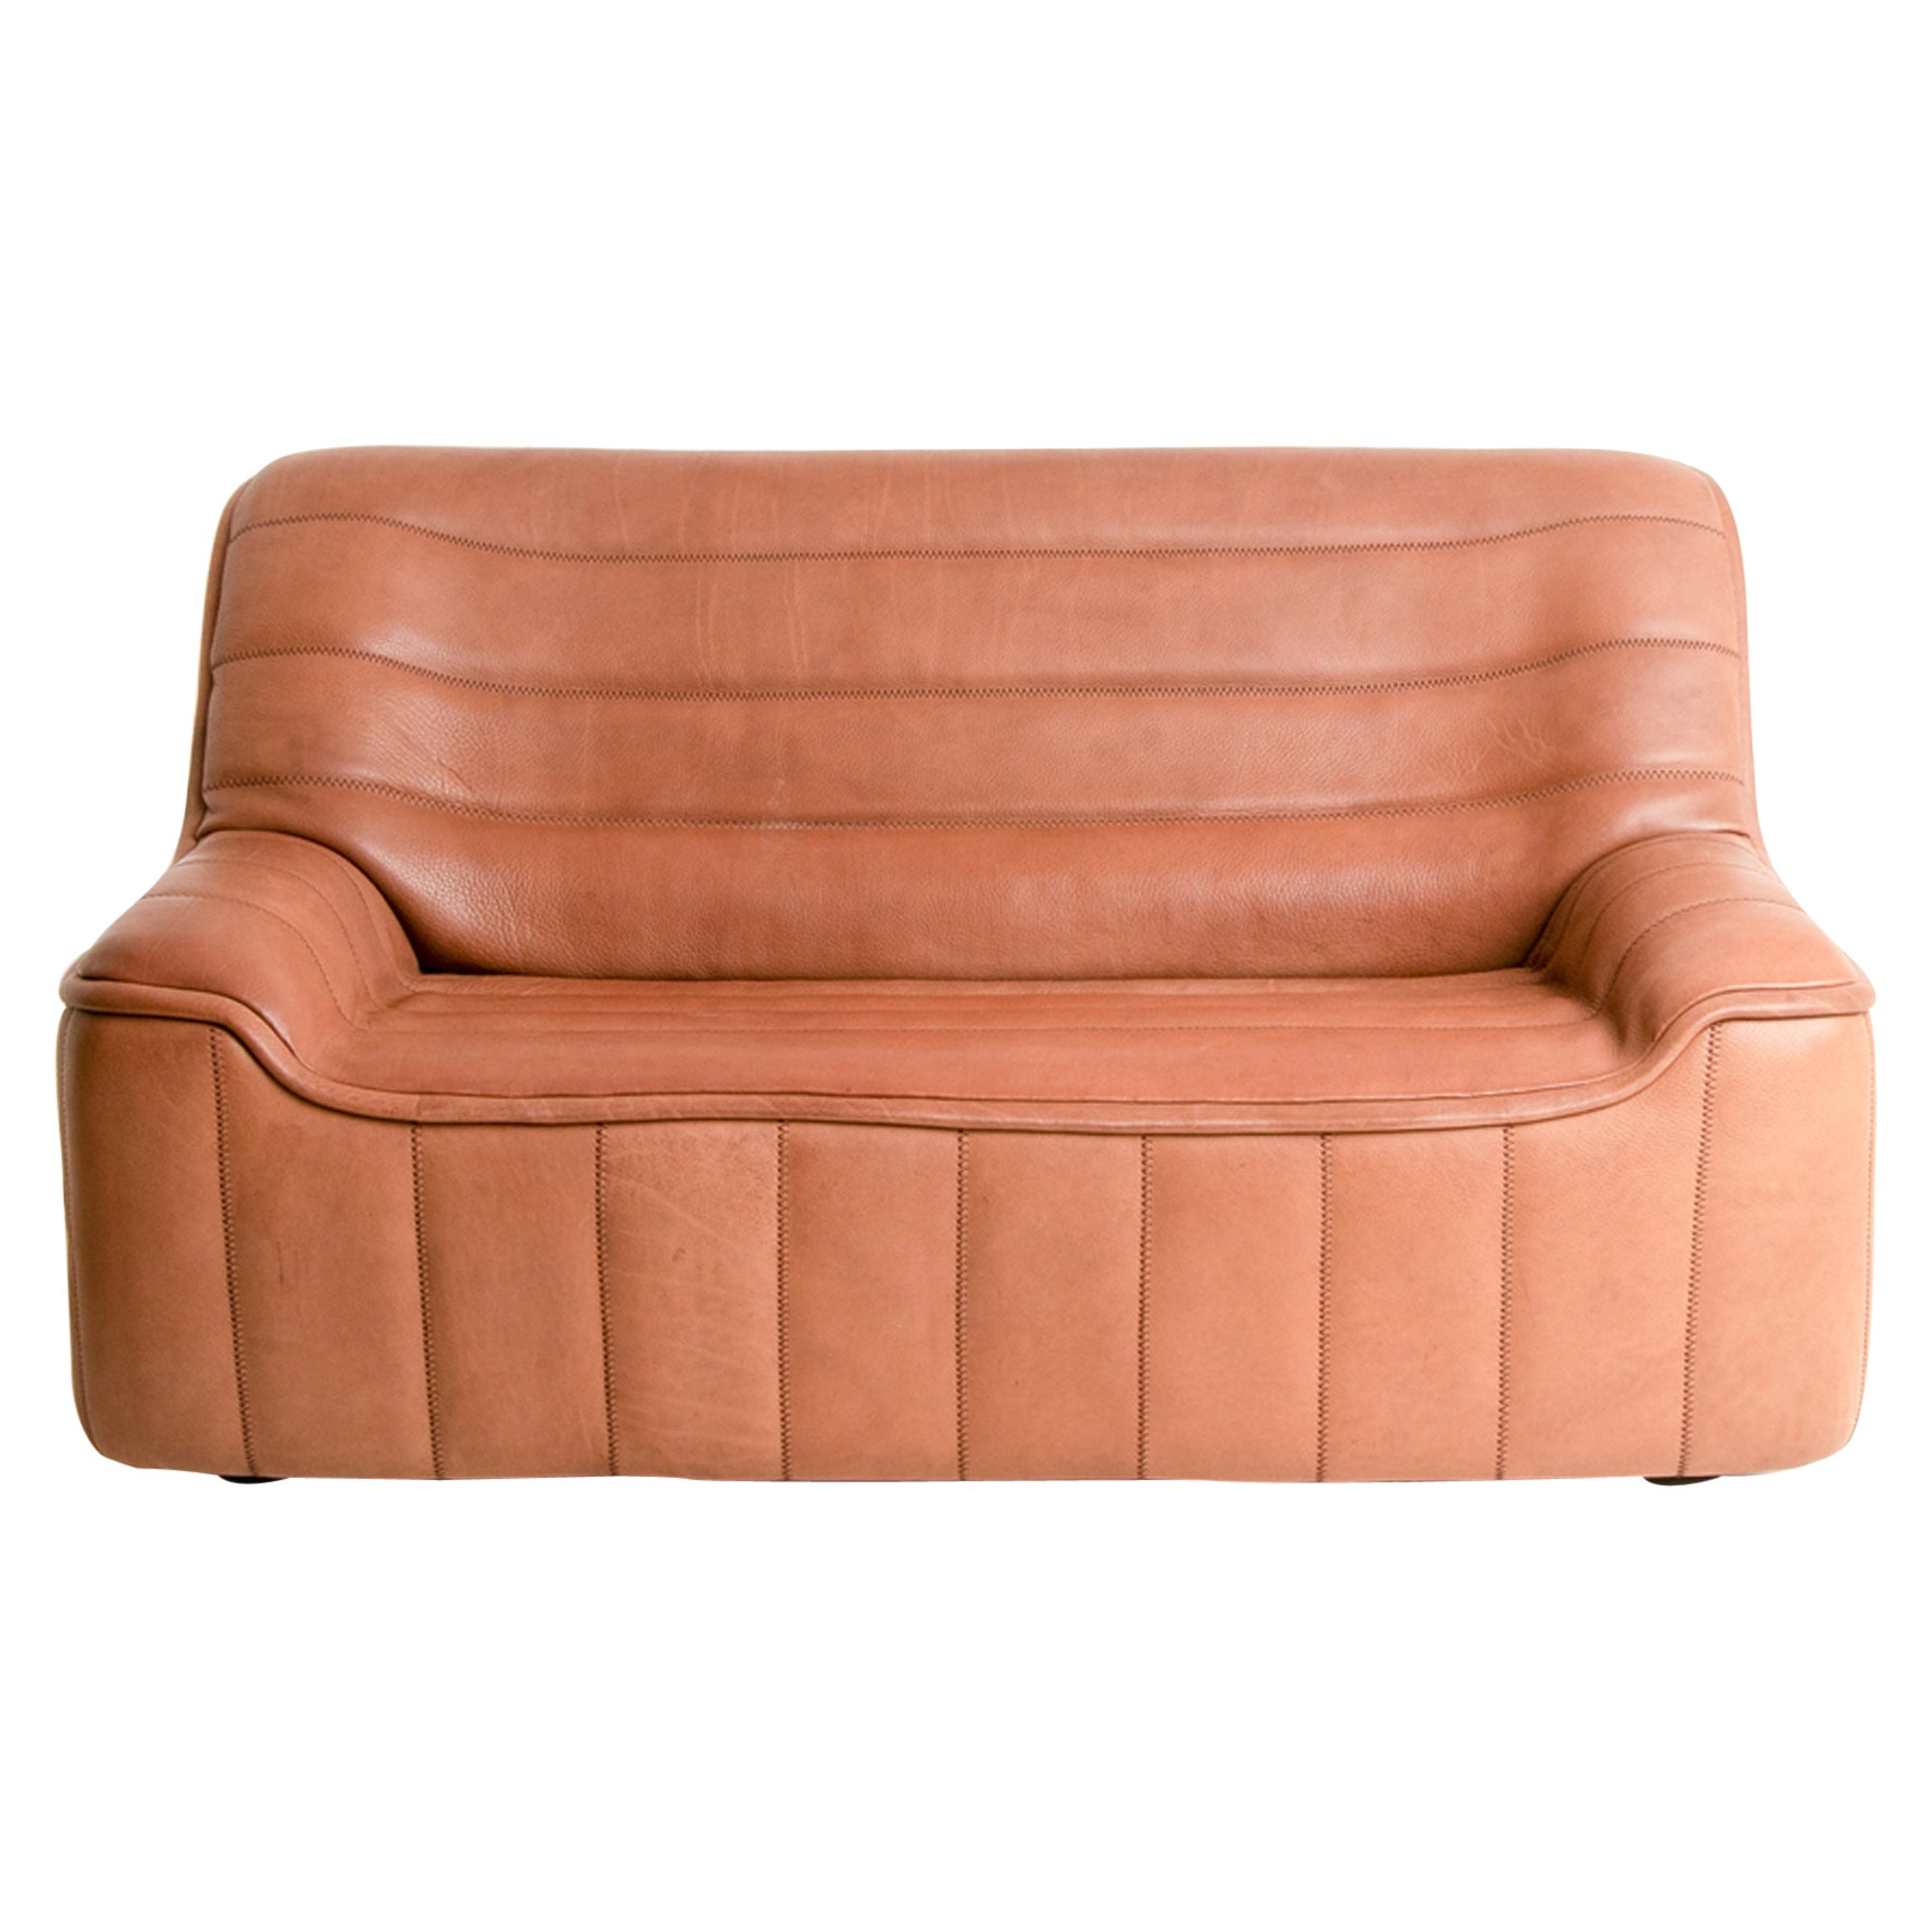 DS84 Model Buffalo Leather Sofa by De Sede Switzerland, c.1970 at 1stDibs